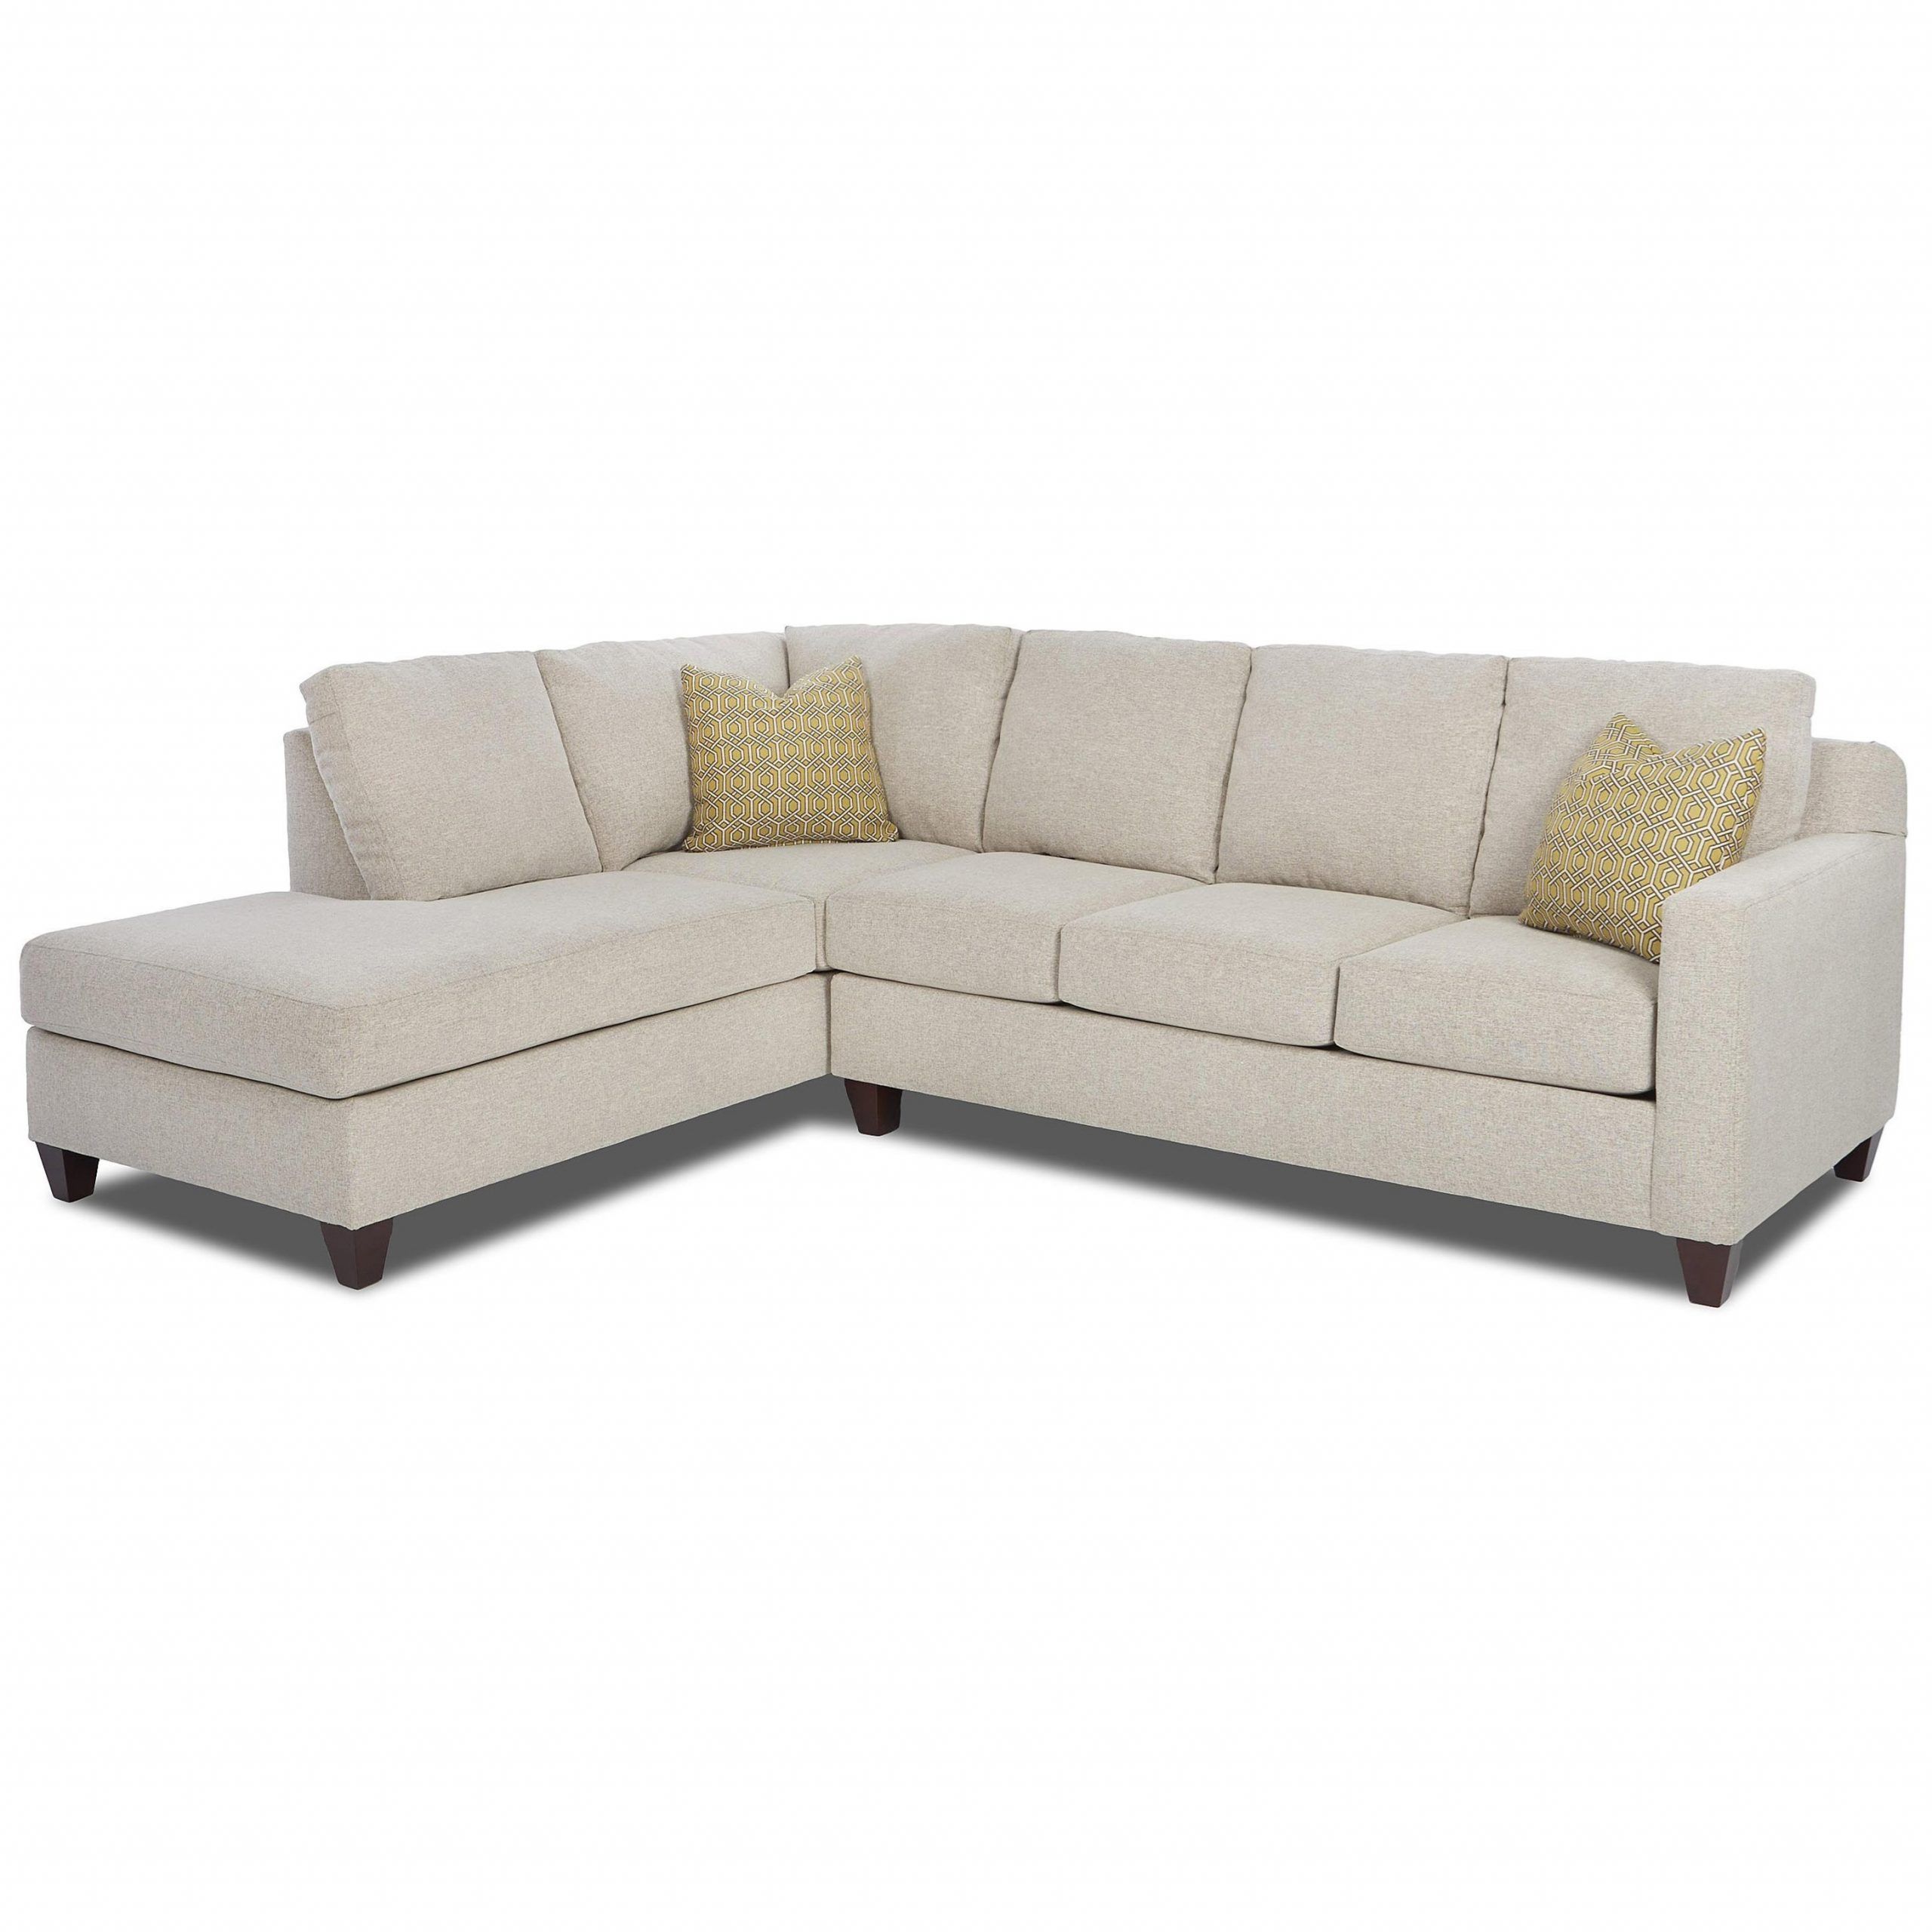 Klaussner Bosco Contemporary 2 Piece Sectional With Left Inside Hannah Left Sectional Sofas (View 7 of 15)